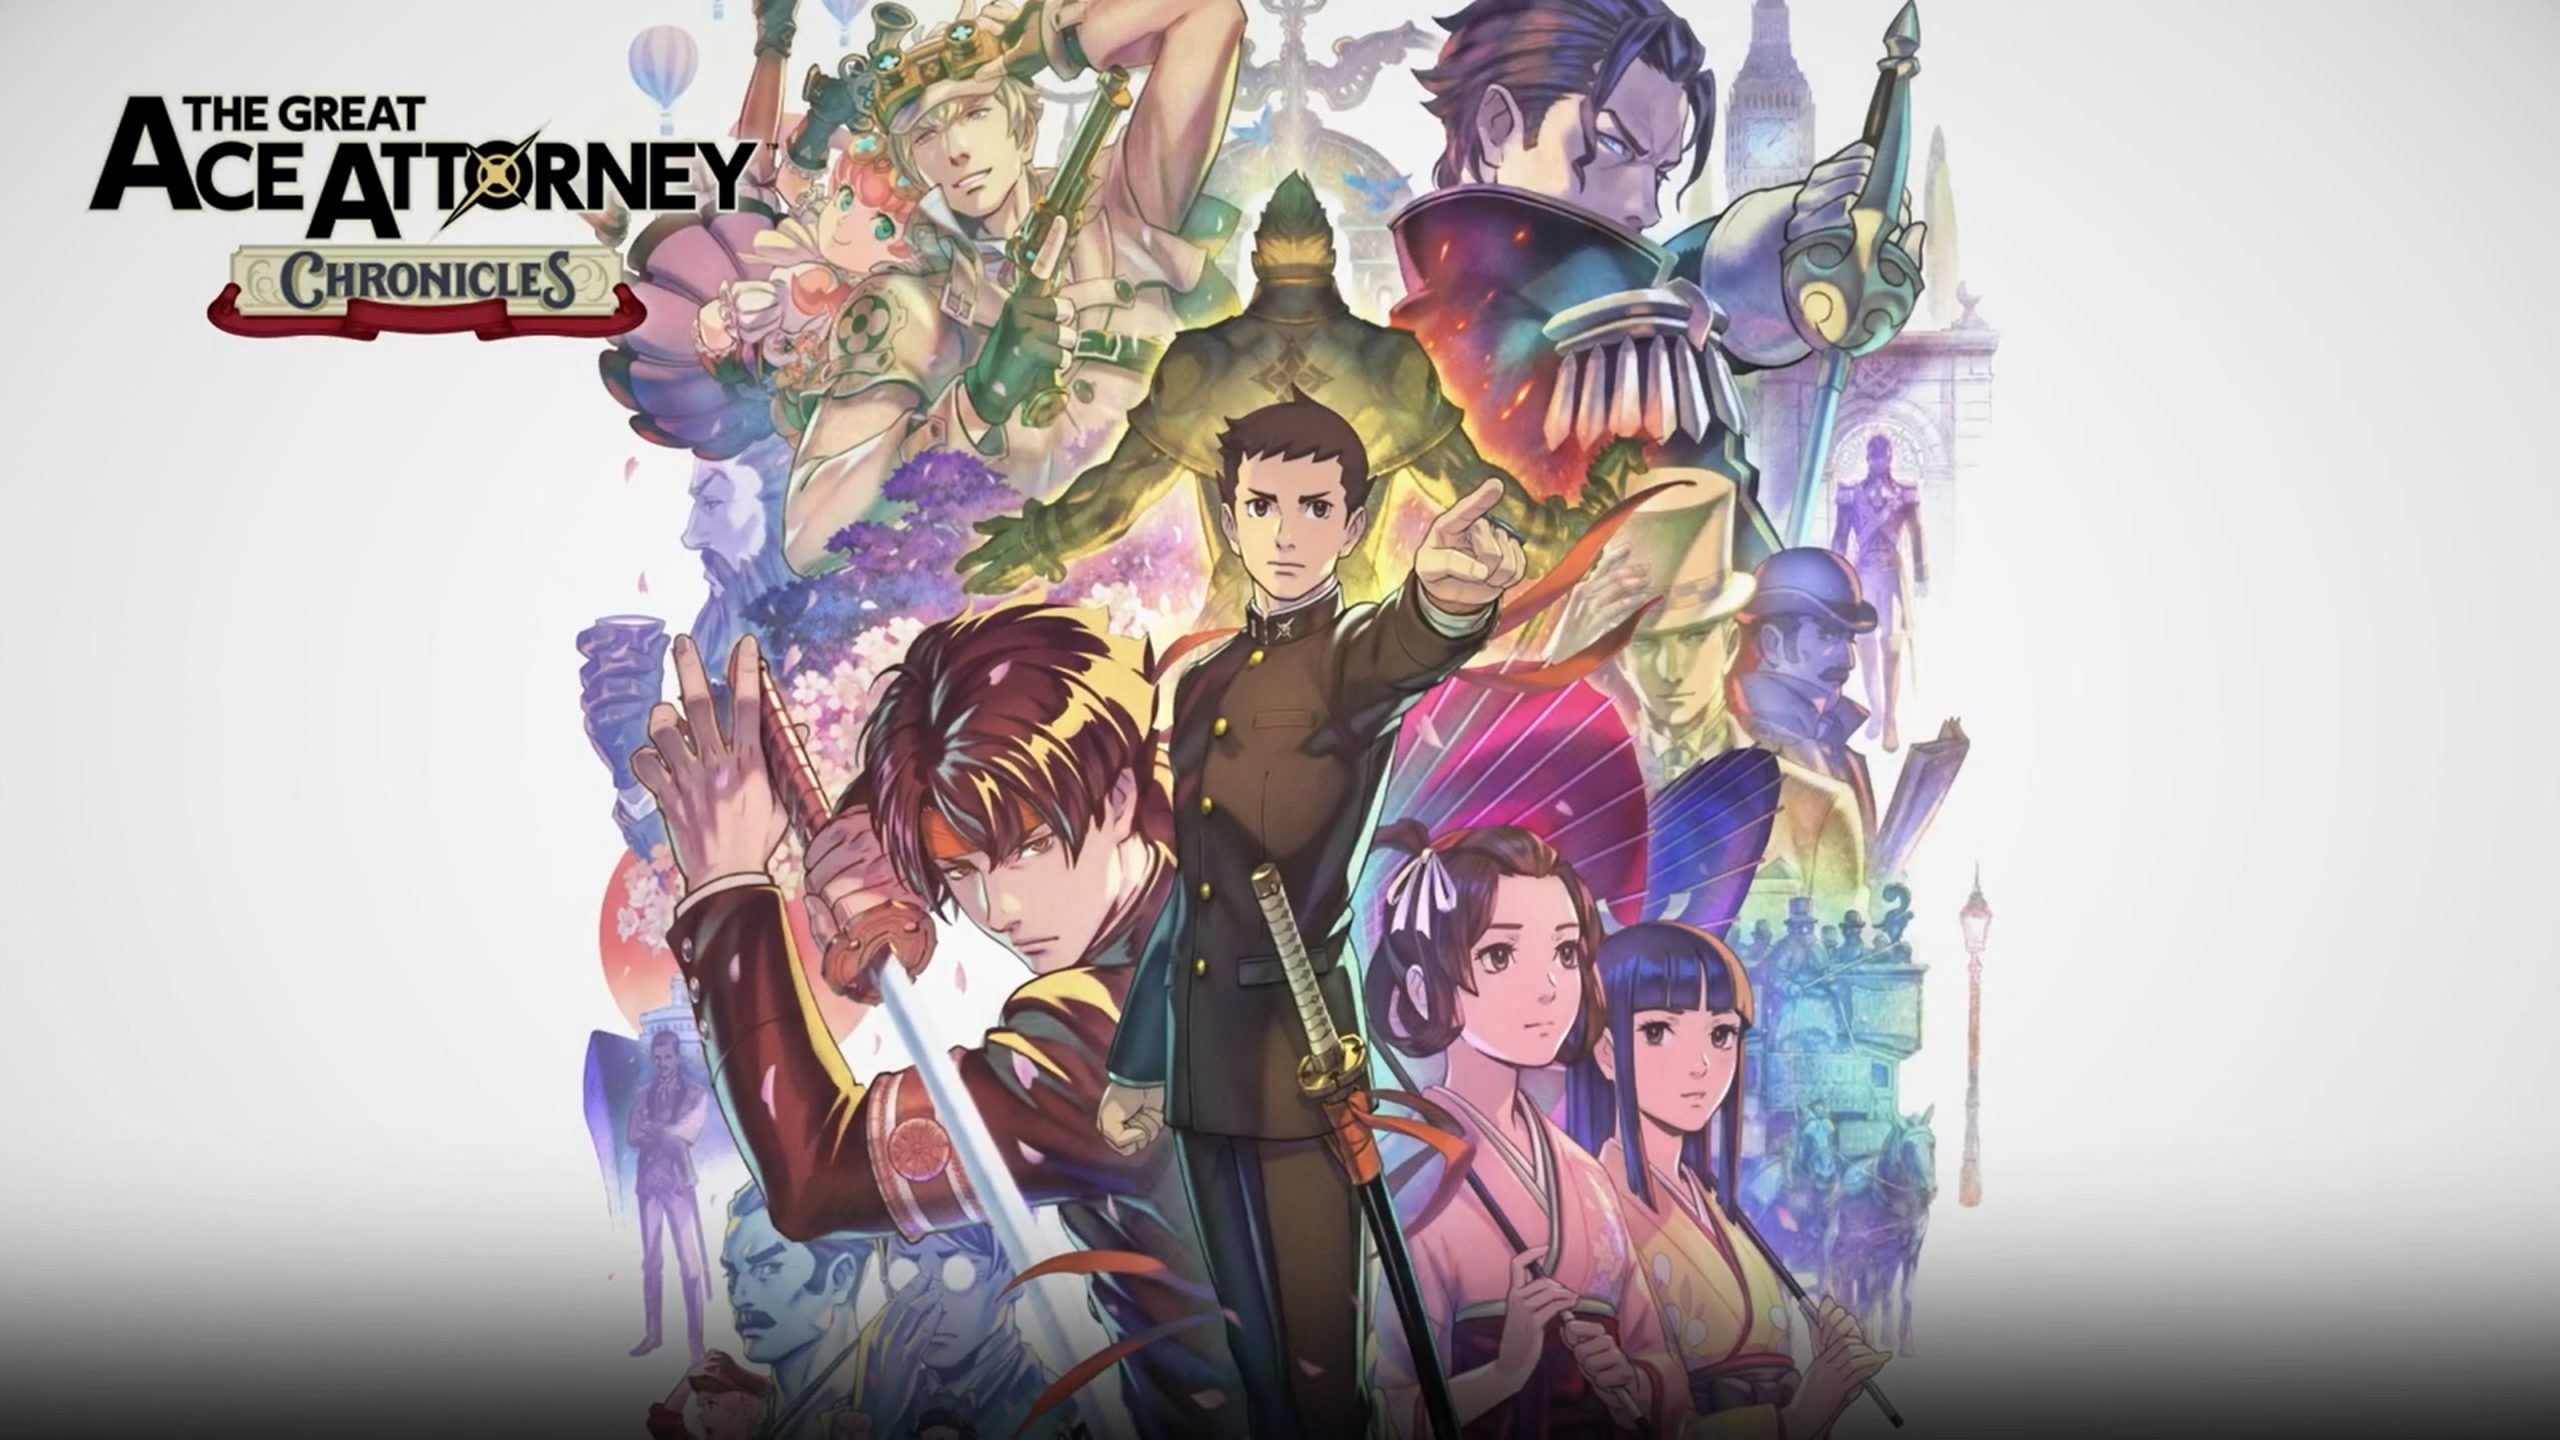 The Great Ace Attorney Chronicles announced for Switch